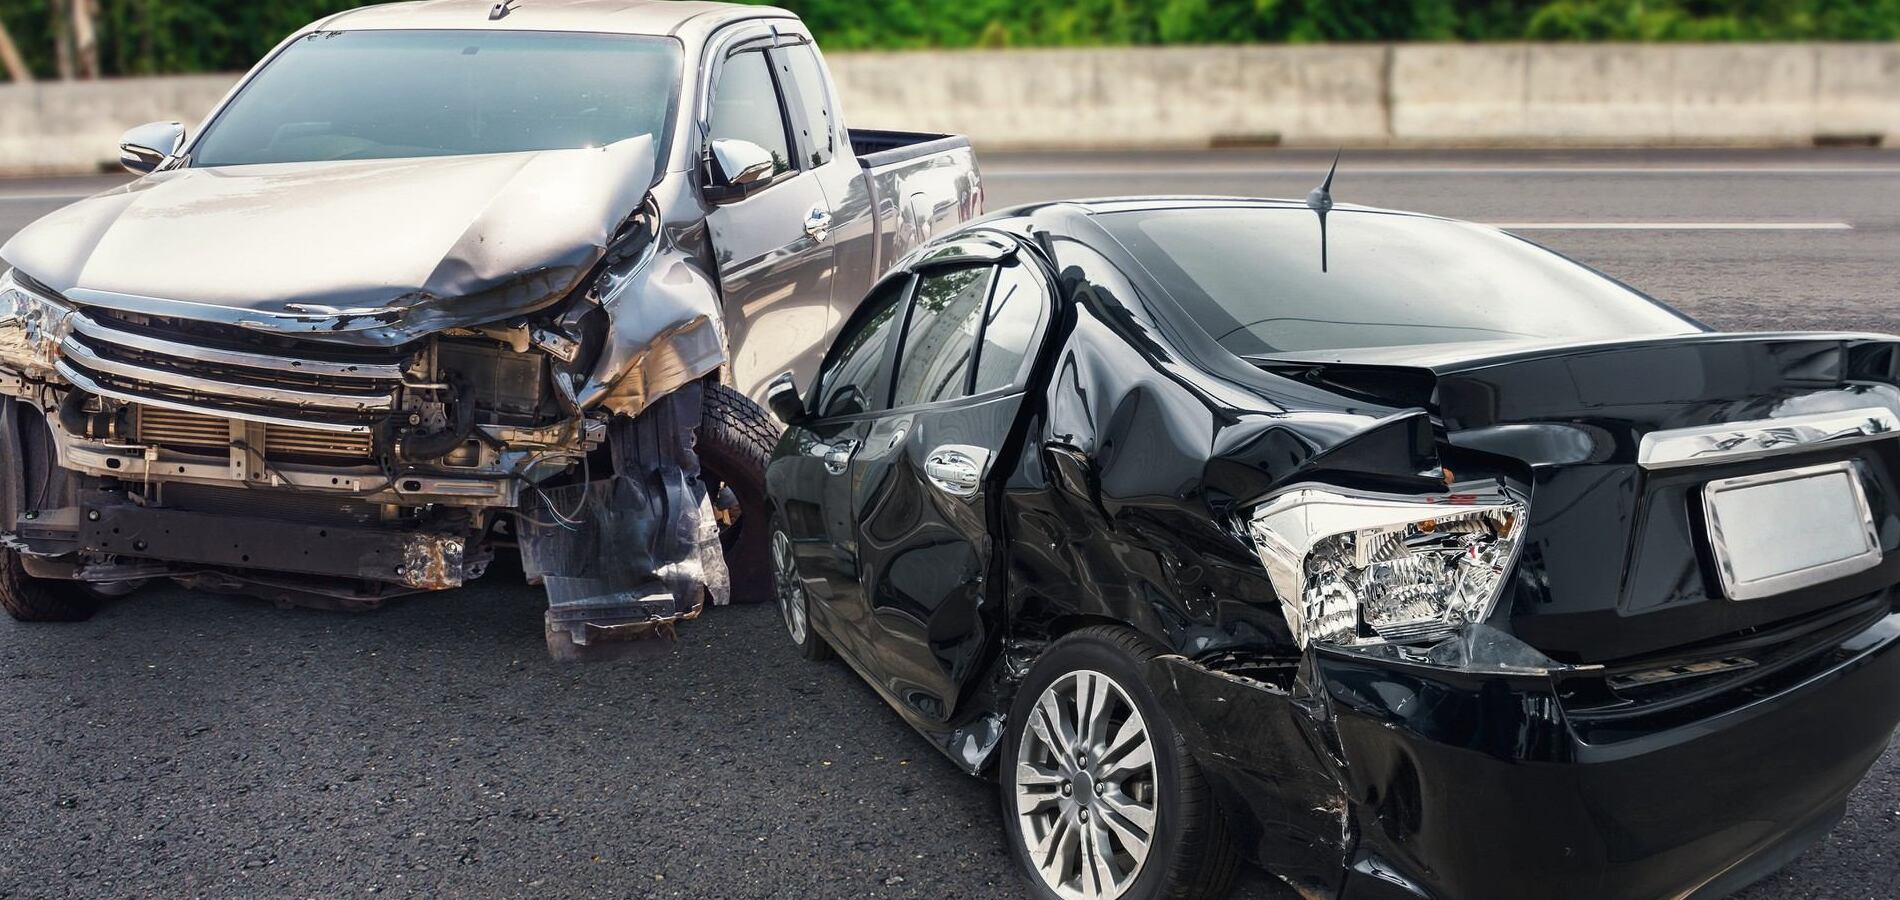 Car Accident Lawyer in West Hollywood, CA